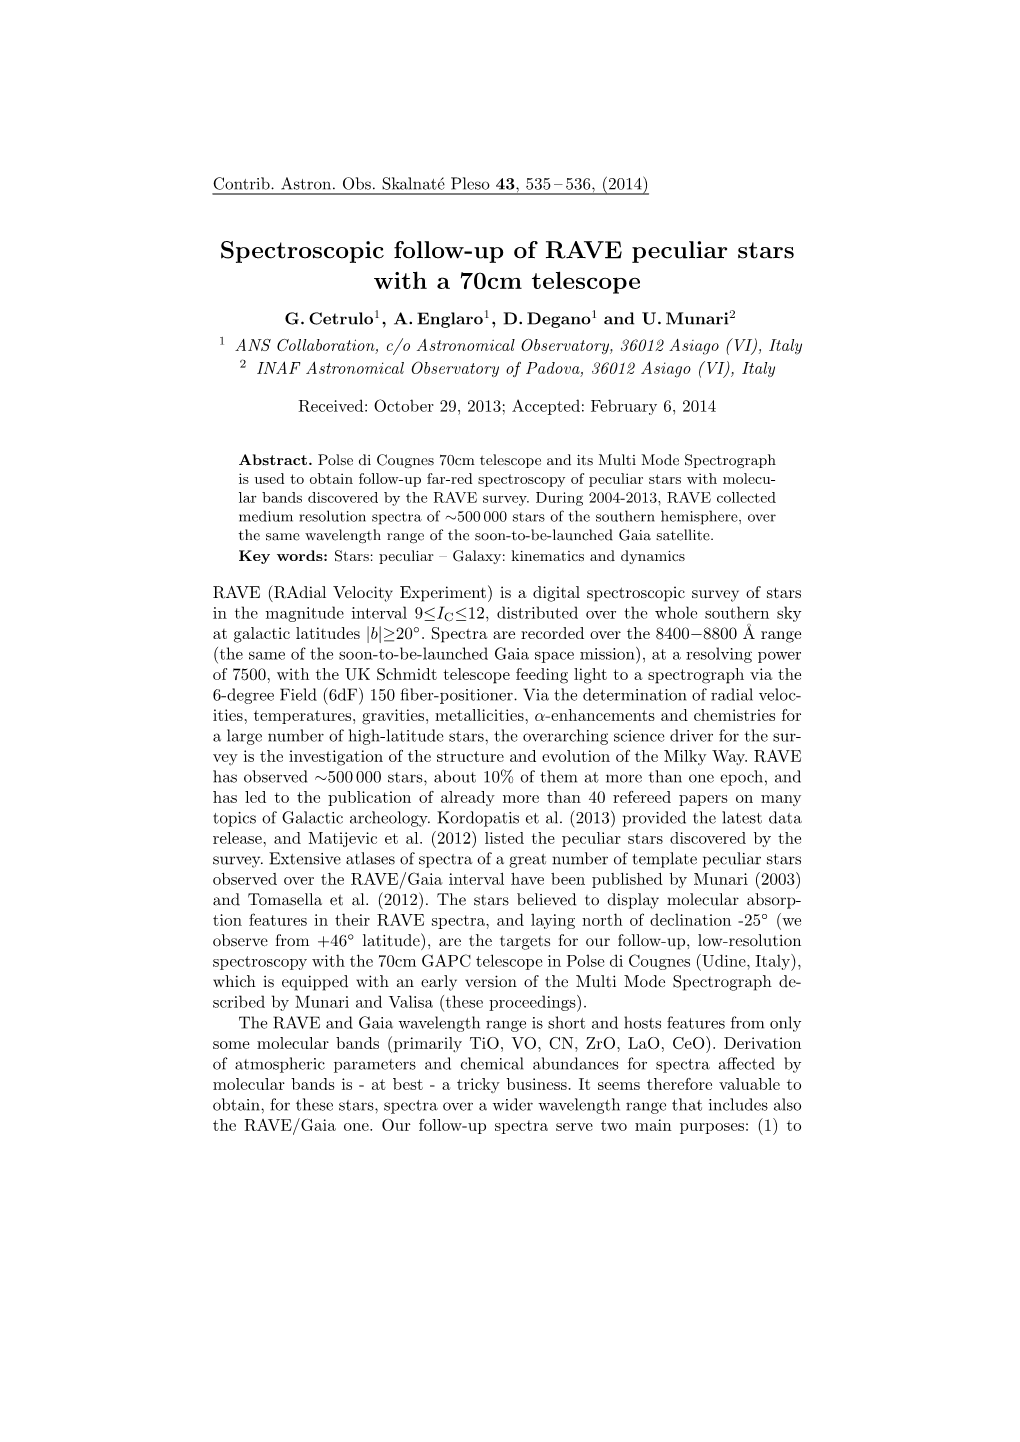 Spectroscopic Follow-Up of RAVE Peculiar Stars with a 70Cm Telescope G